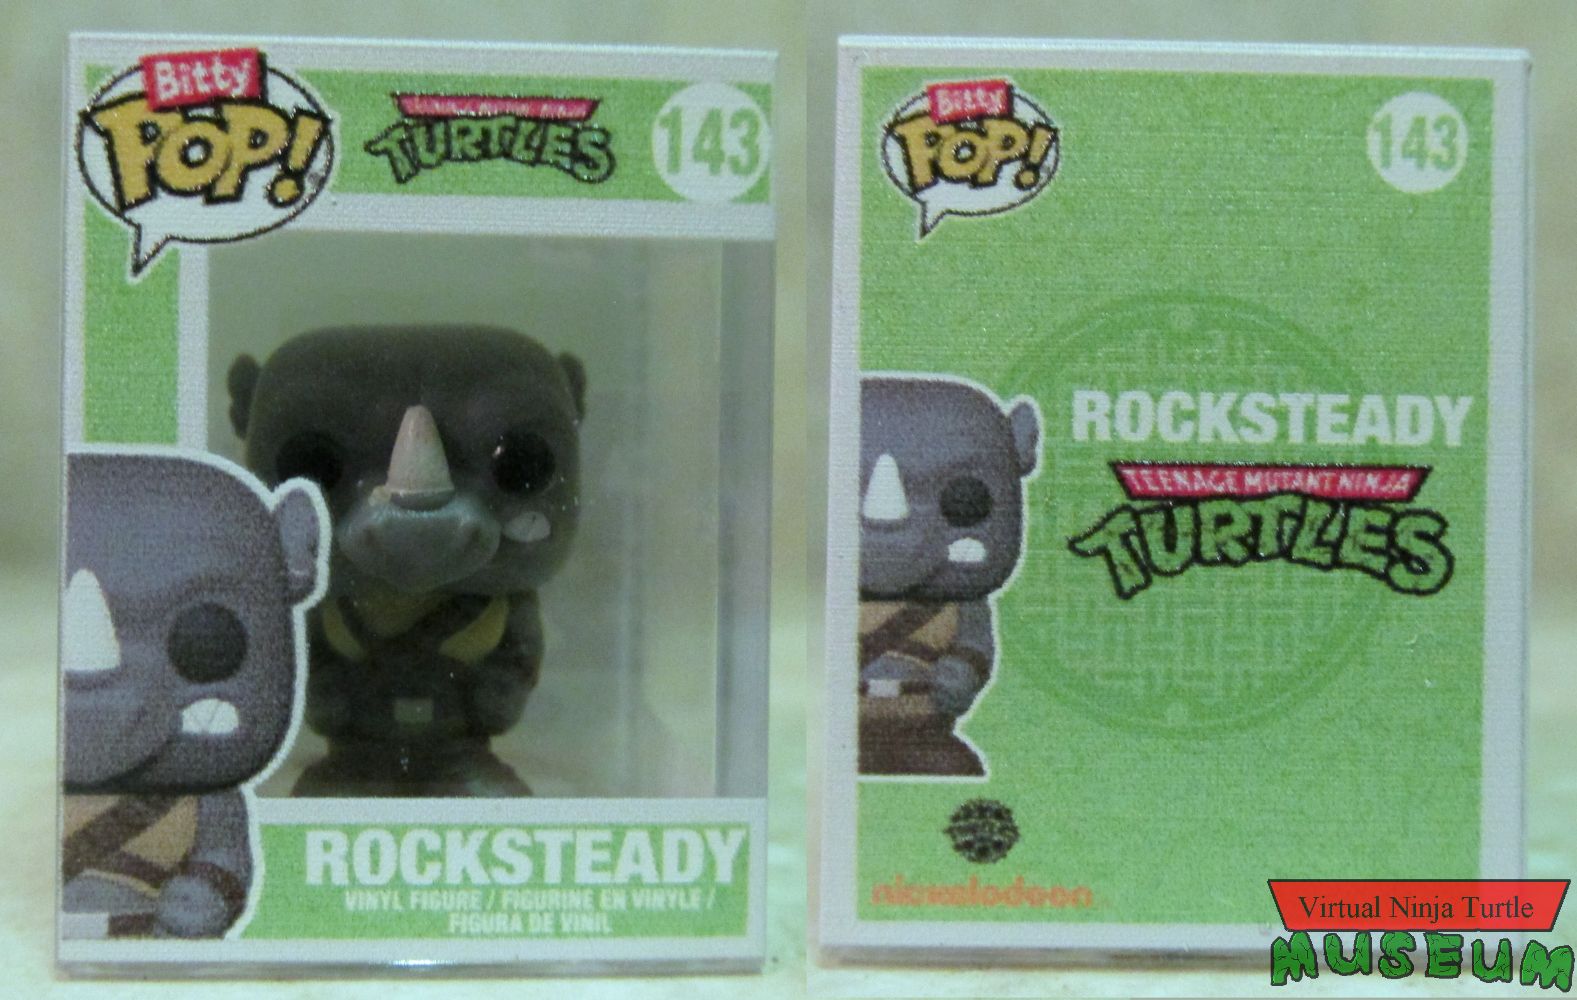 Rocksteady in case front and back